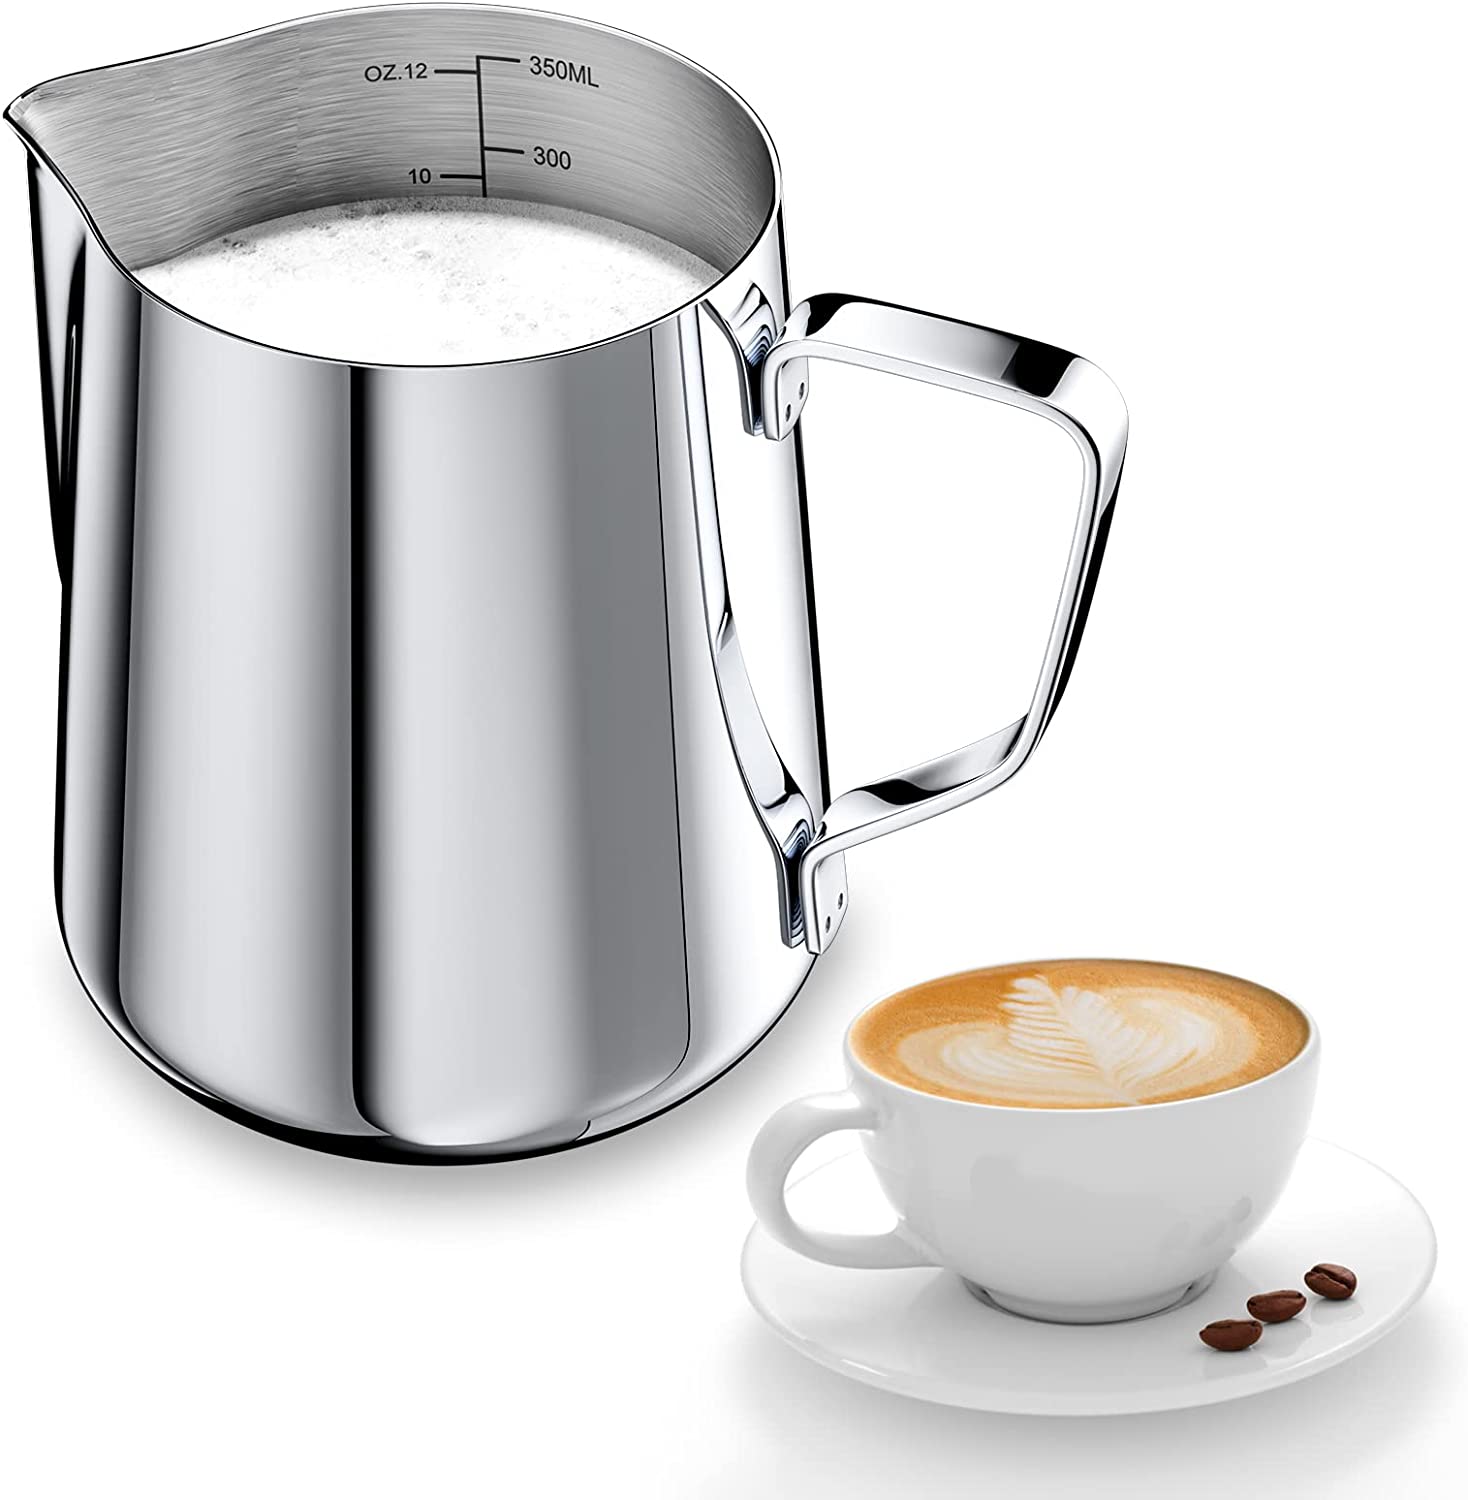 Newan 350 ml Milk Jug for Milk Frothing 304 Stainless Steel, Milk Jug Measurement Mark 12 Oz for Barista, Milk Pitcher for Cappuccino, Espresso, Latte Art, Perfect for Coffee Lovers, Silver